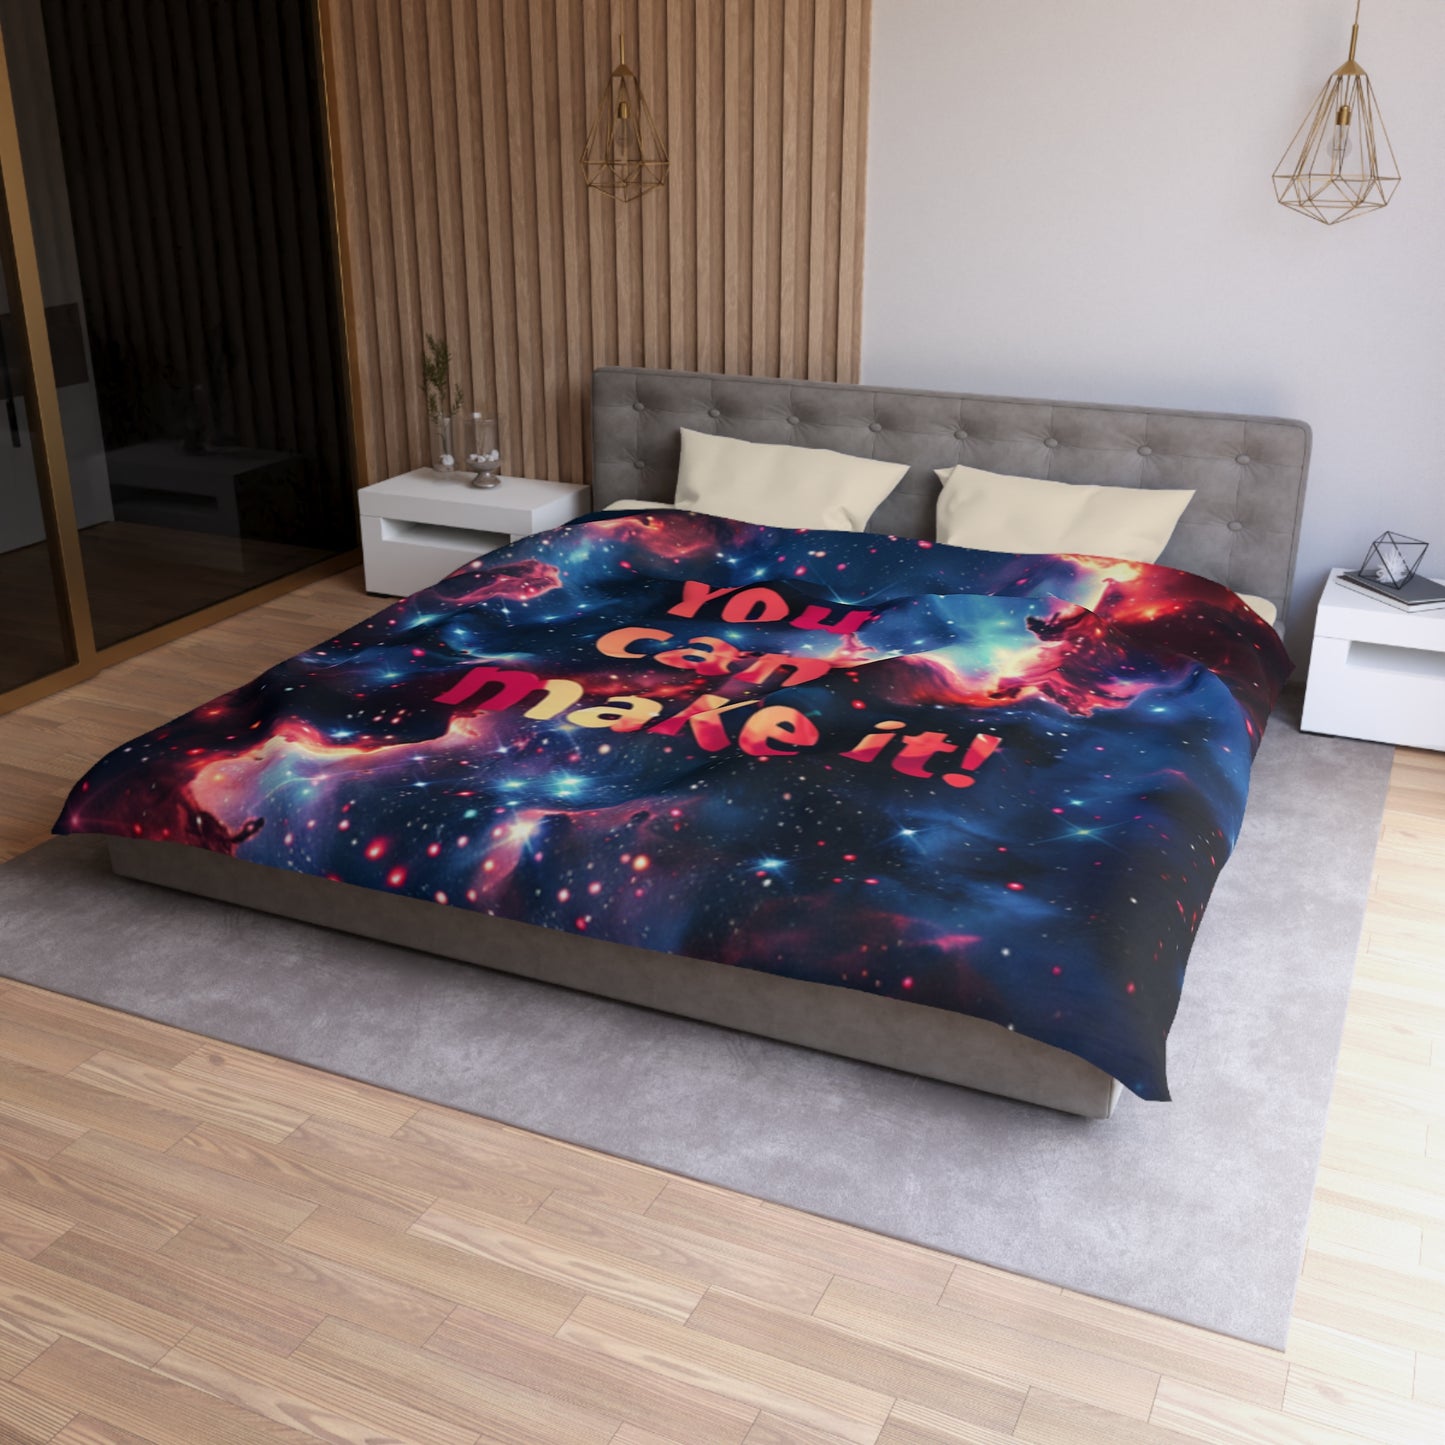 Microfiber Duvet Cover - You can make it